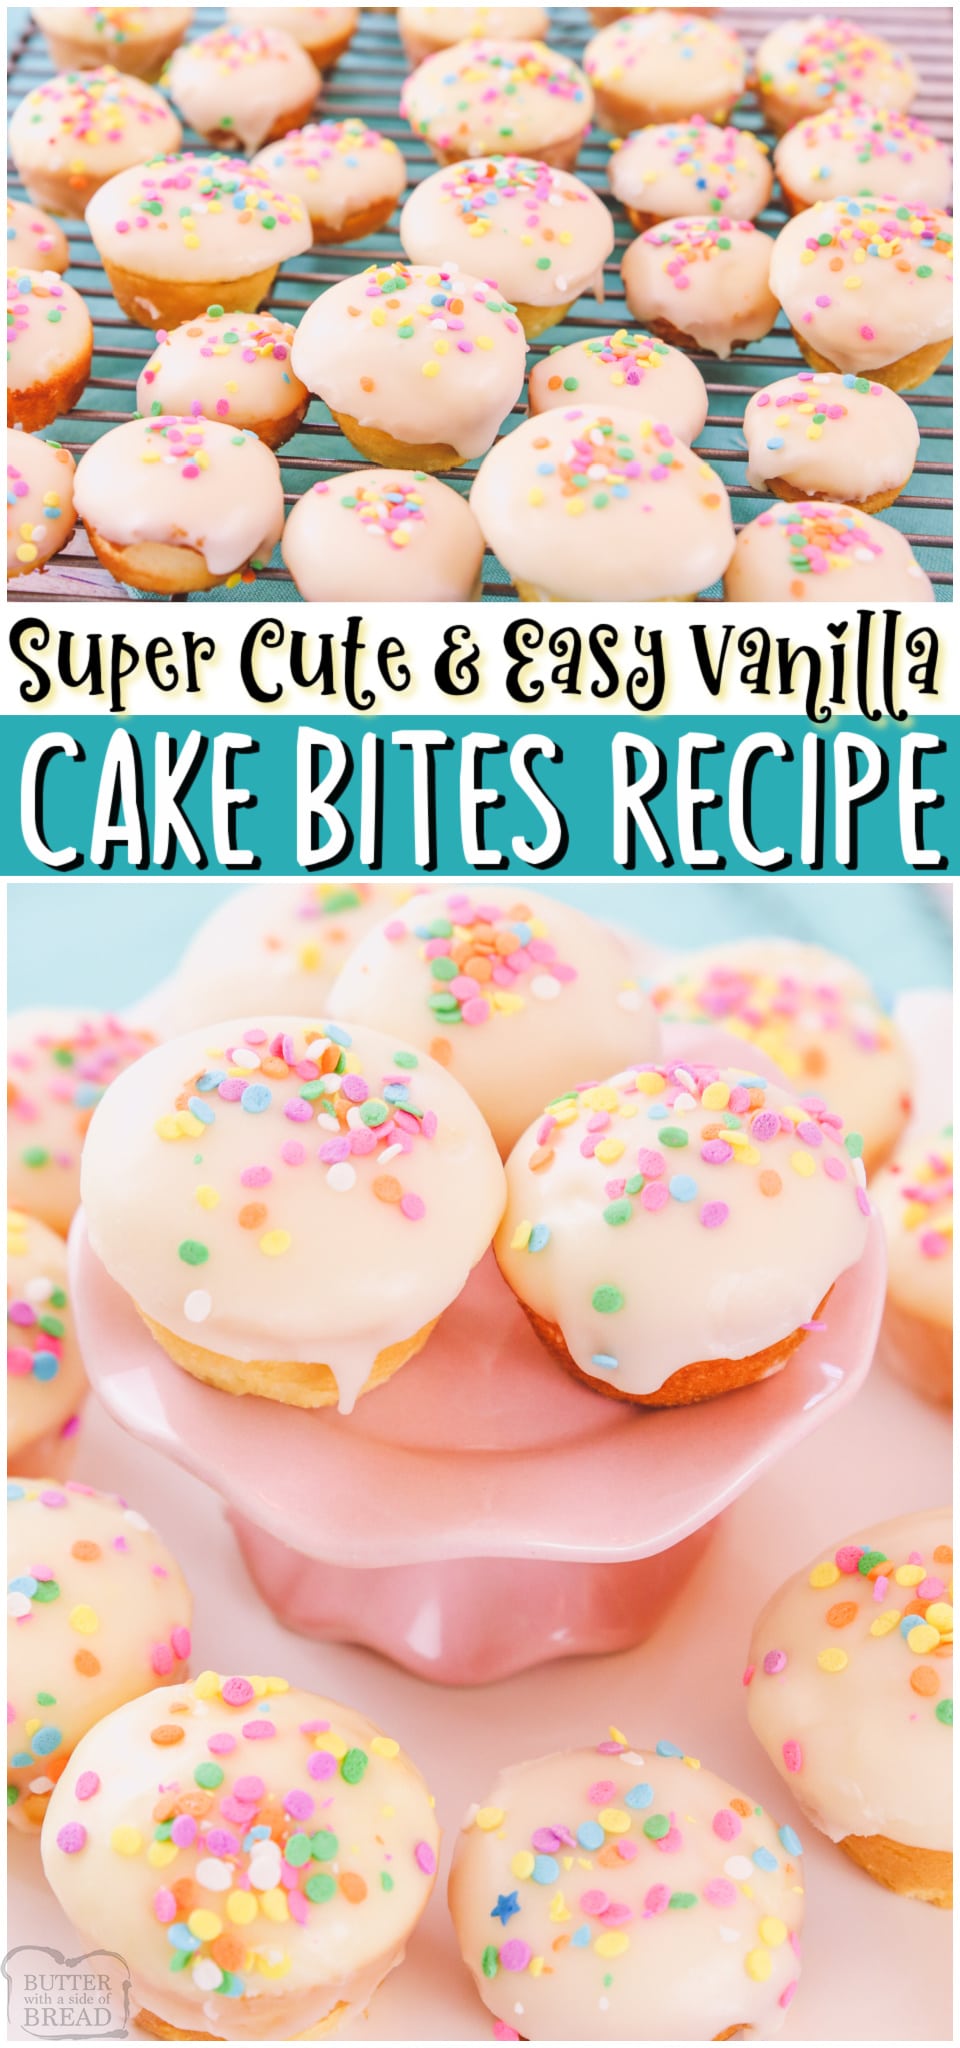 Easy Vanilla Cake Bites are simple glazed bite-sized treats that are so easy to make! Super cute & beyond tasty, these vanilla cake bites will be the hit of the party!